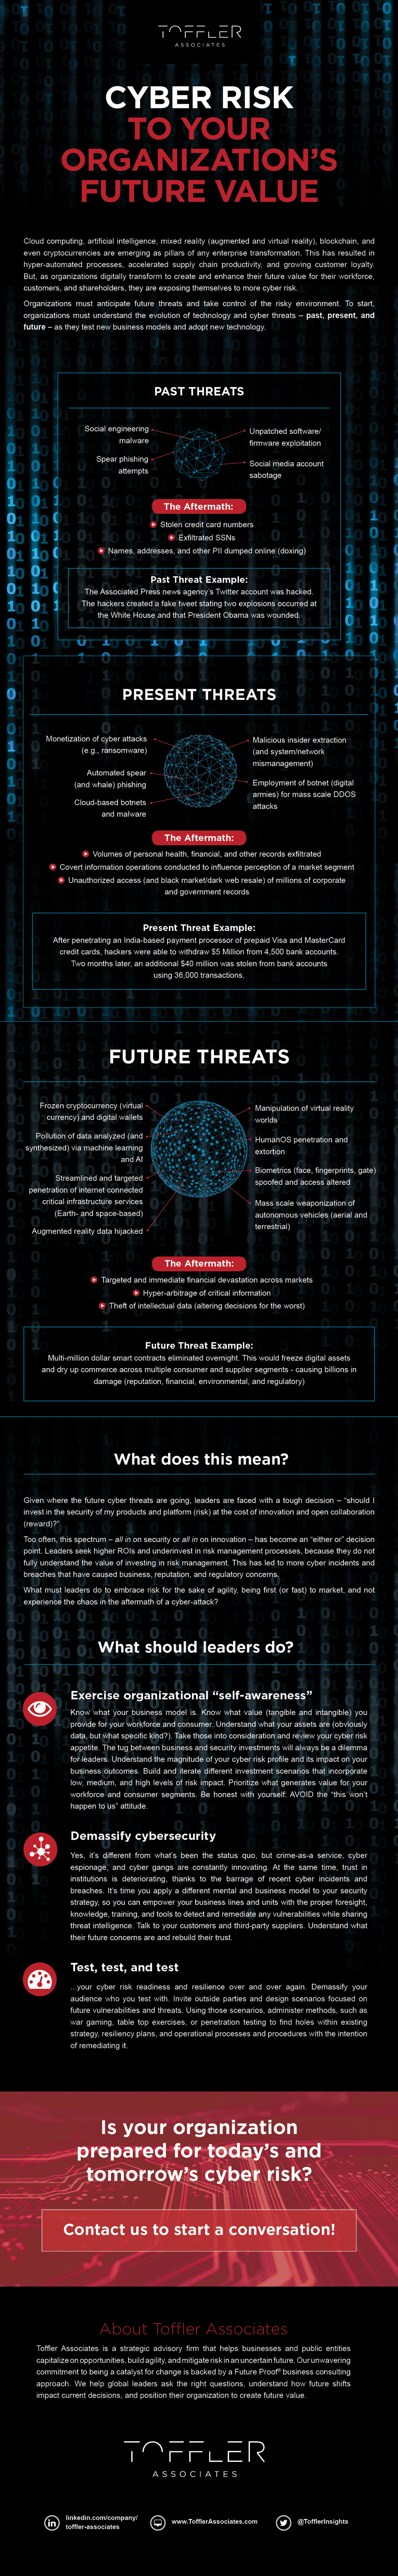 TA_Cyber_Security_Infographic_v9_image-002.png